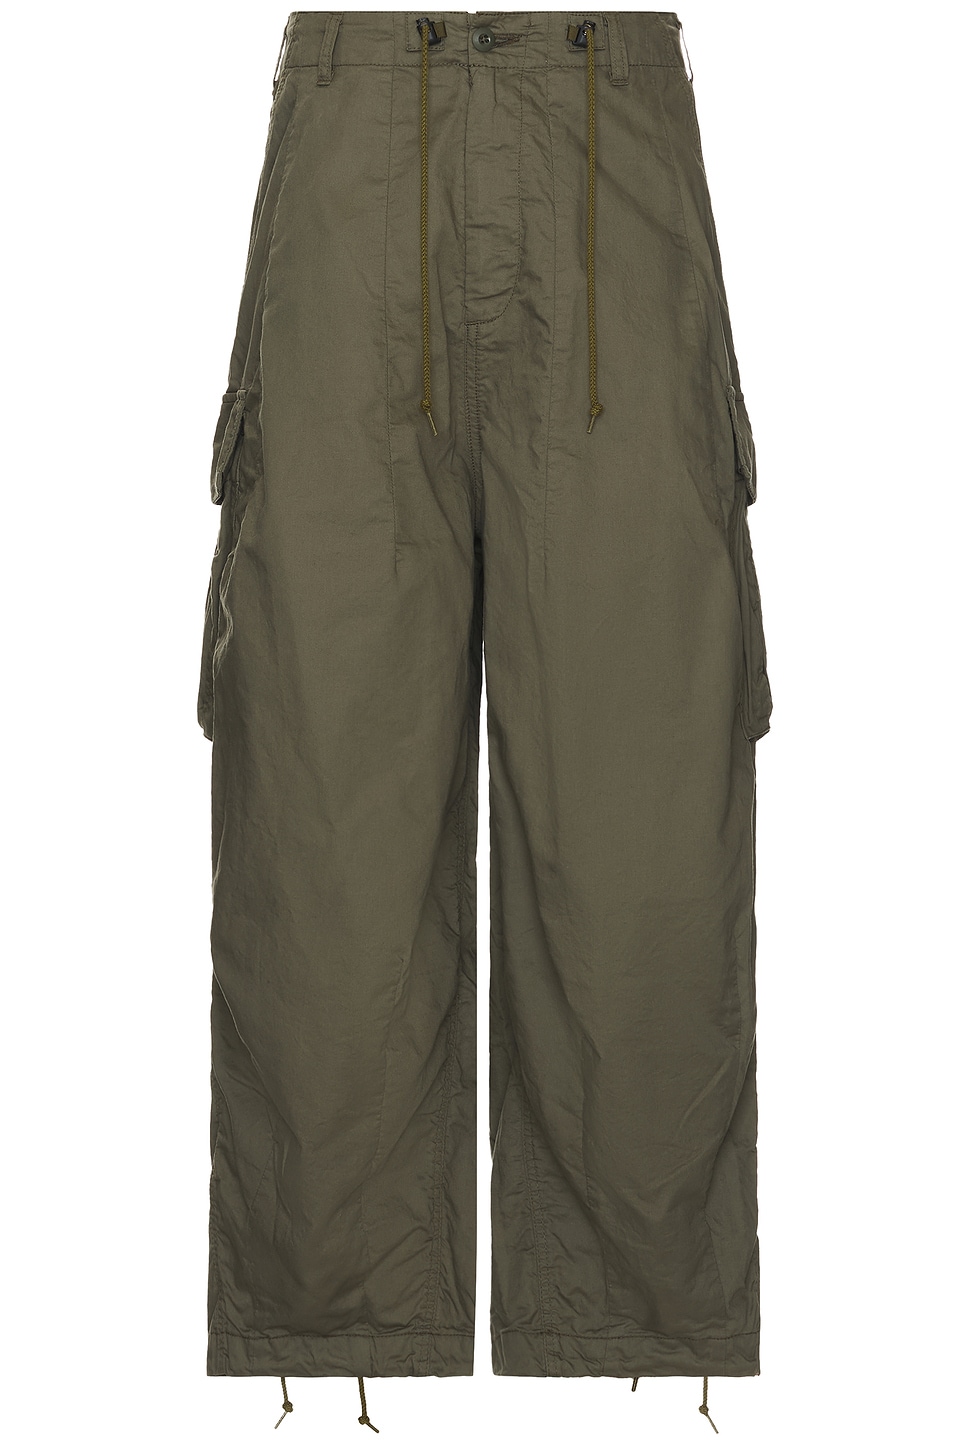 H.D. Pant BDU in Olive